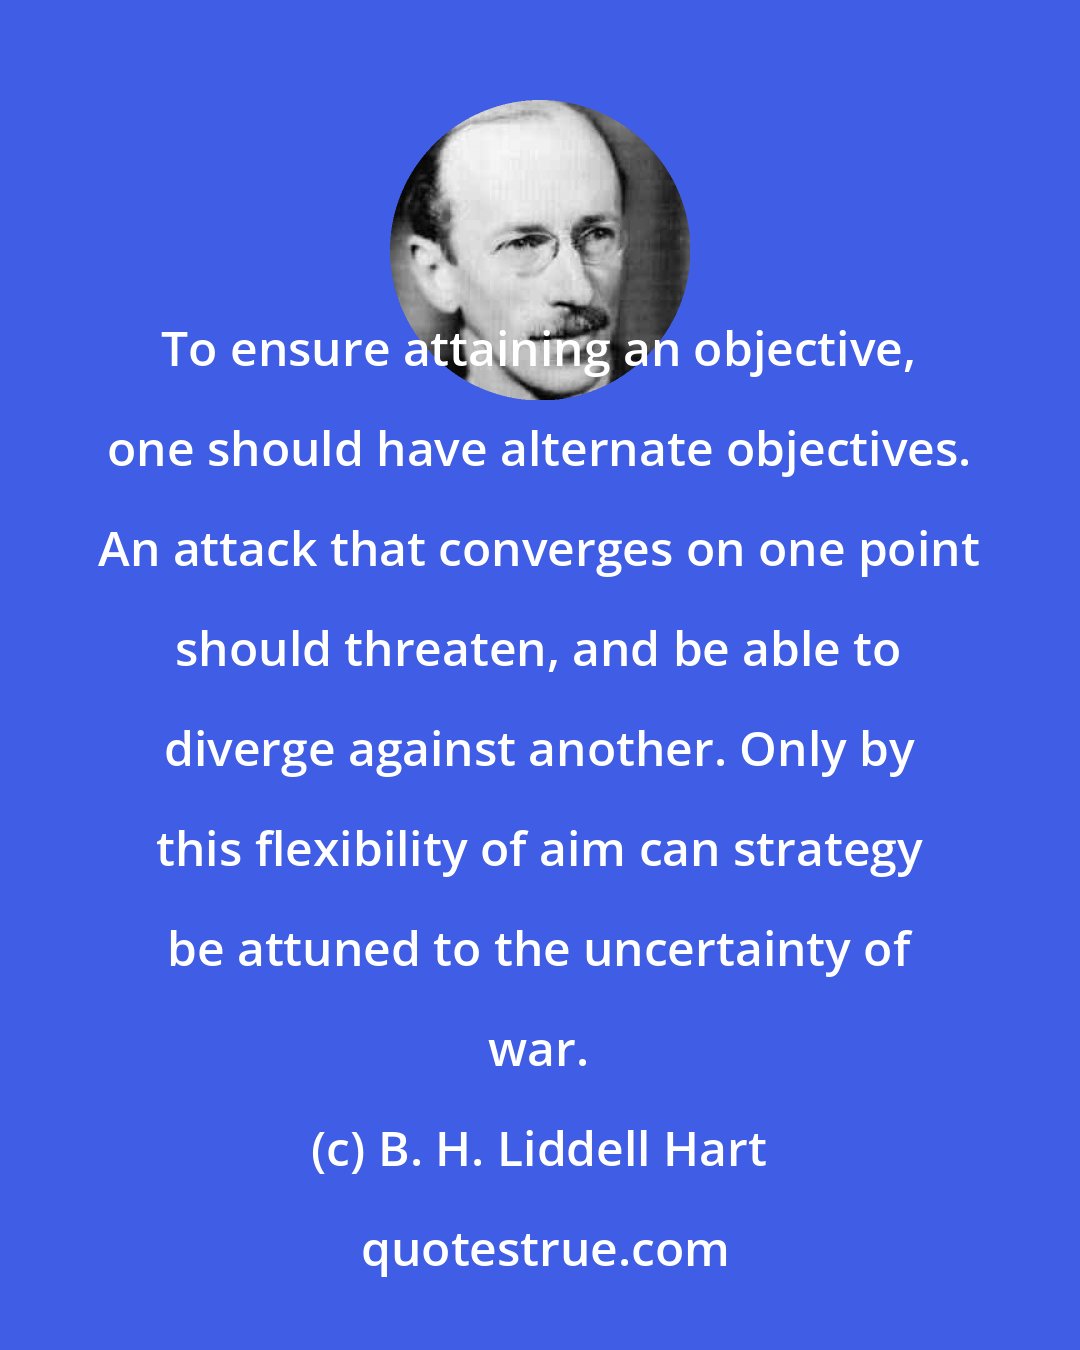 B. H. Liddell Hart: To ensure attaining an objective, one should have alternate objectives. An attack that converges on one point should threaten, and be able to diverge against another. Only by this flexibility of aim can strategy be attuned to the uncertainty of war.